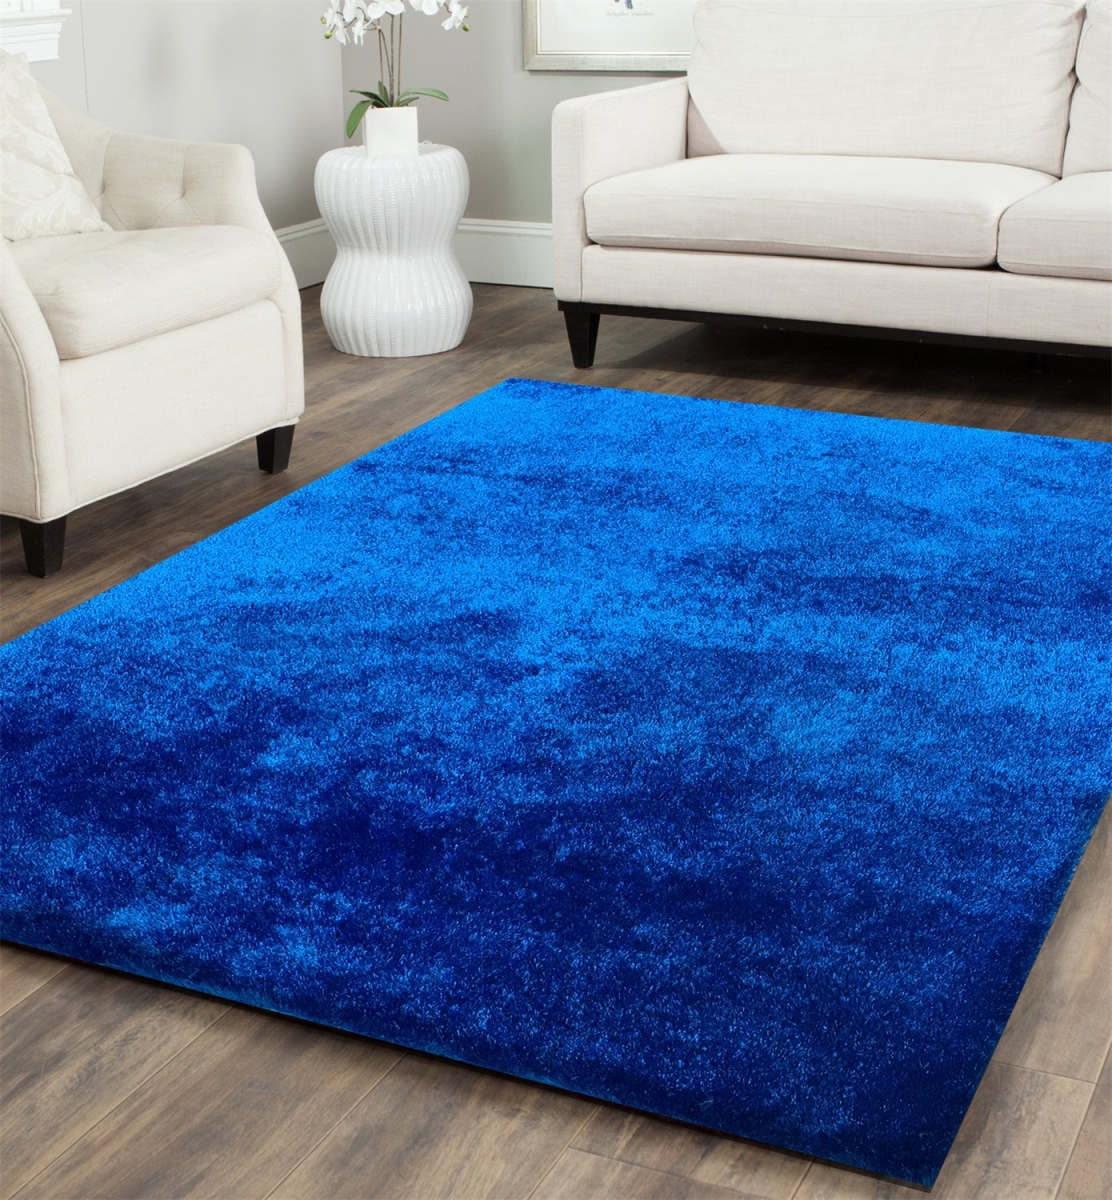 Picture of Amazing Rugs A1012-23 2 x 3 ft. Fuzzy Shaggy Electro Blue Hand Tufted Area Rug